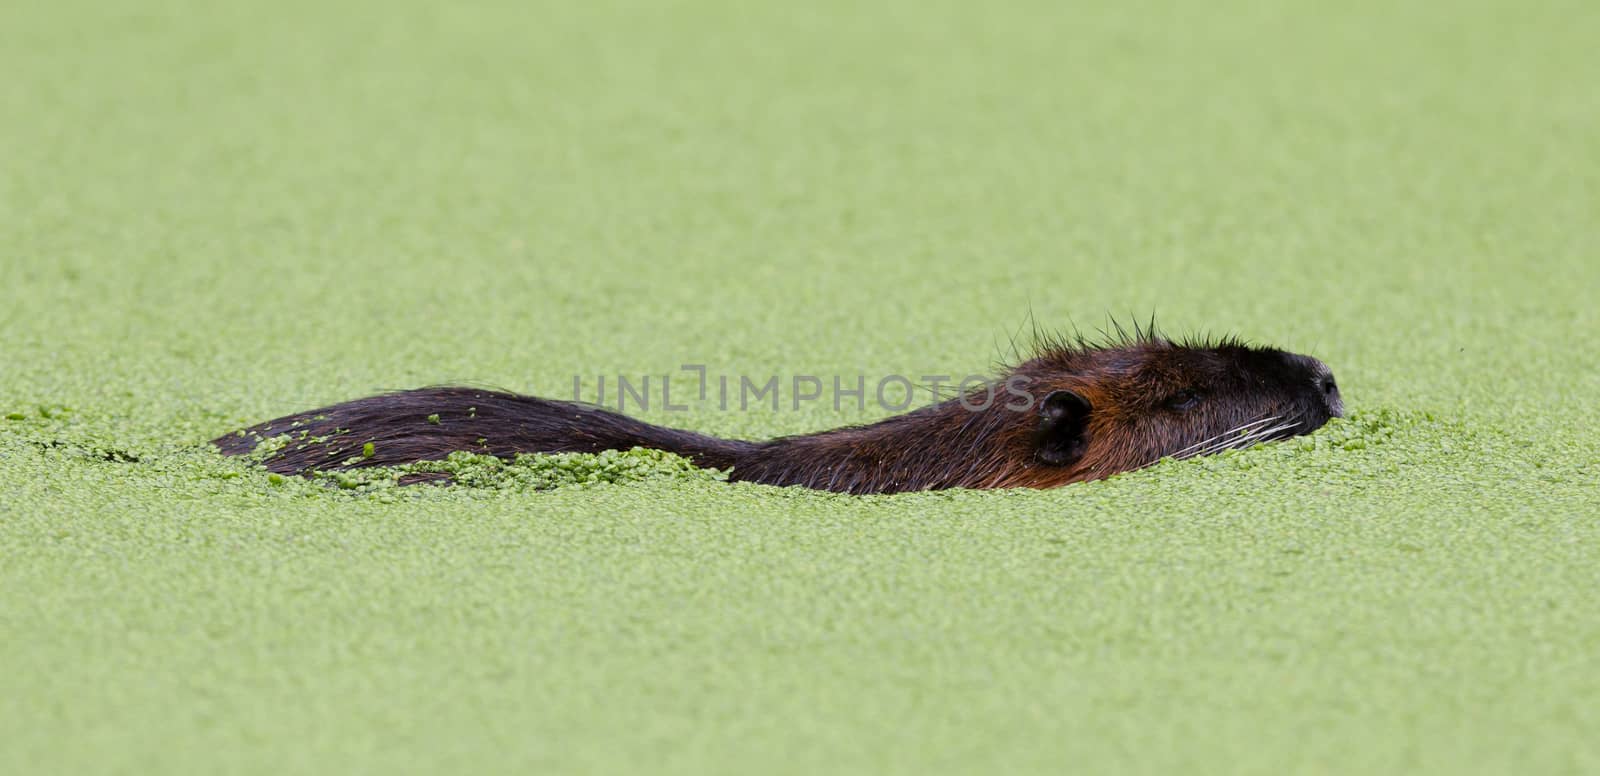 Beaver in the middle of a pool filled with duckweed by michaklootwijk